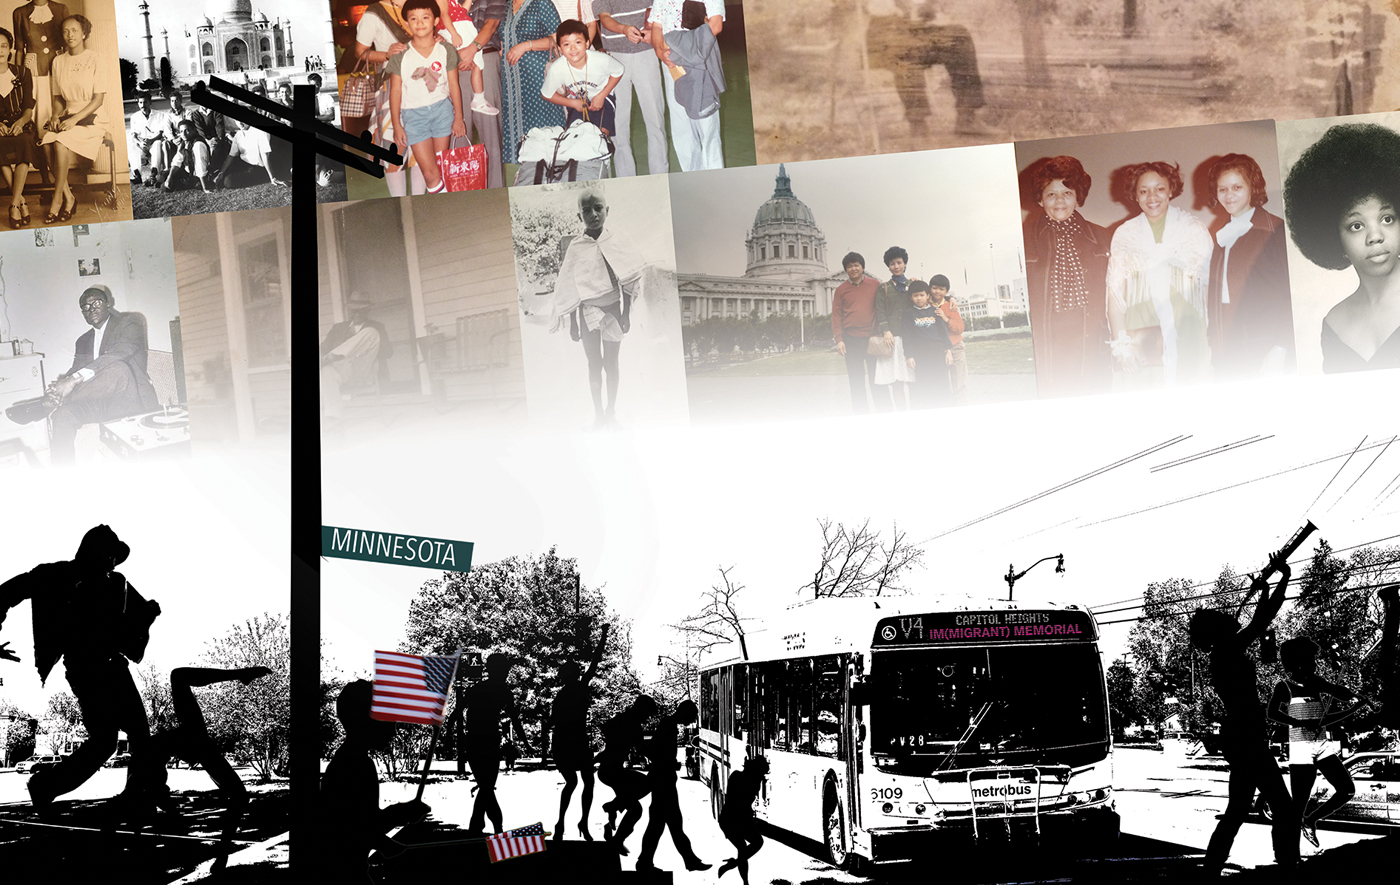 The Im(migrant) illustrates the elemental experience of movement, arrival, and the making of a new home by commemorating the varied journeys that friends, family, and strangers have taken through America's landscape in pursuit of opportunity and freedom. This is an image collage of the vision for the memorial, showing Randle Circle with an overlay of photographs of immigrants and migrants with silhouettes of performing artists.